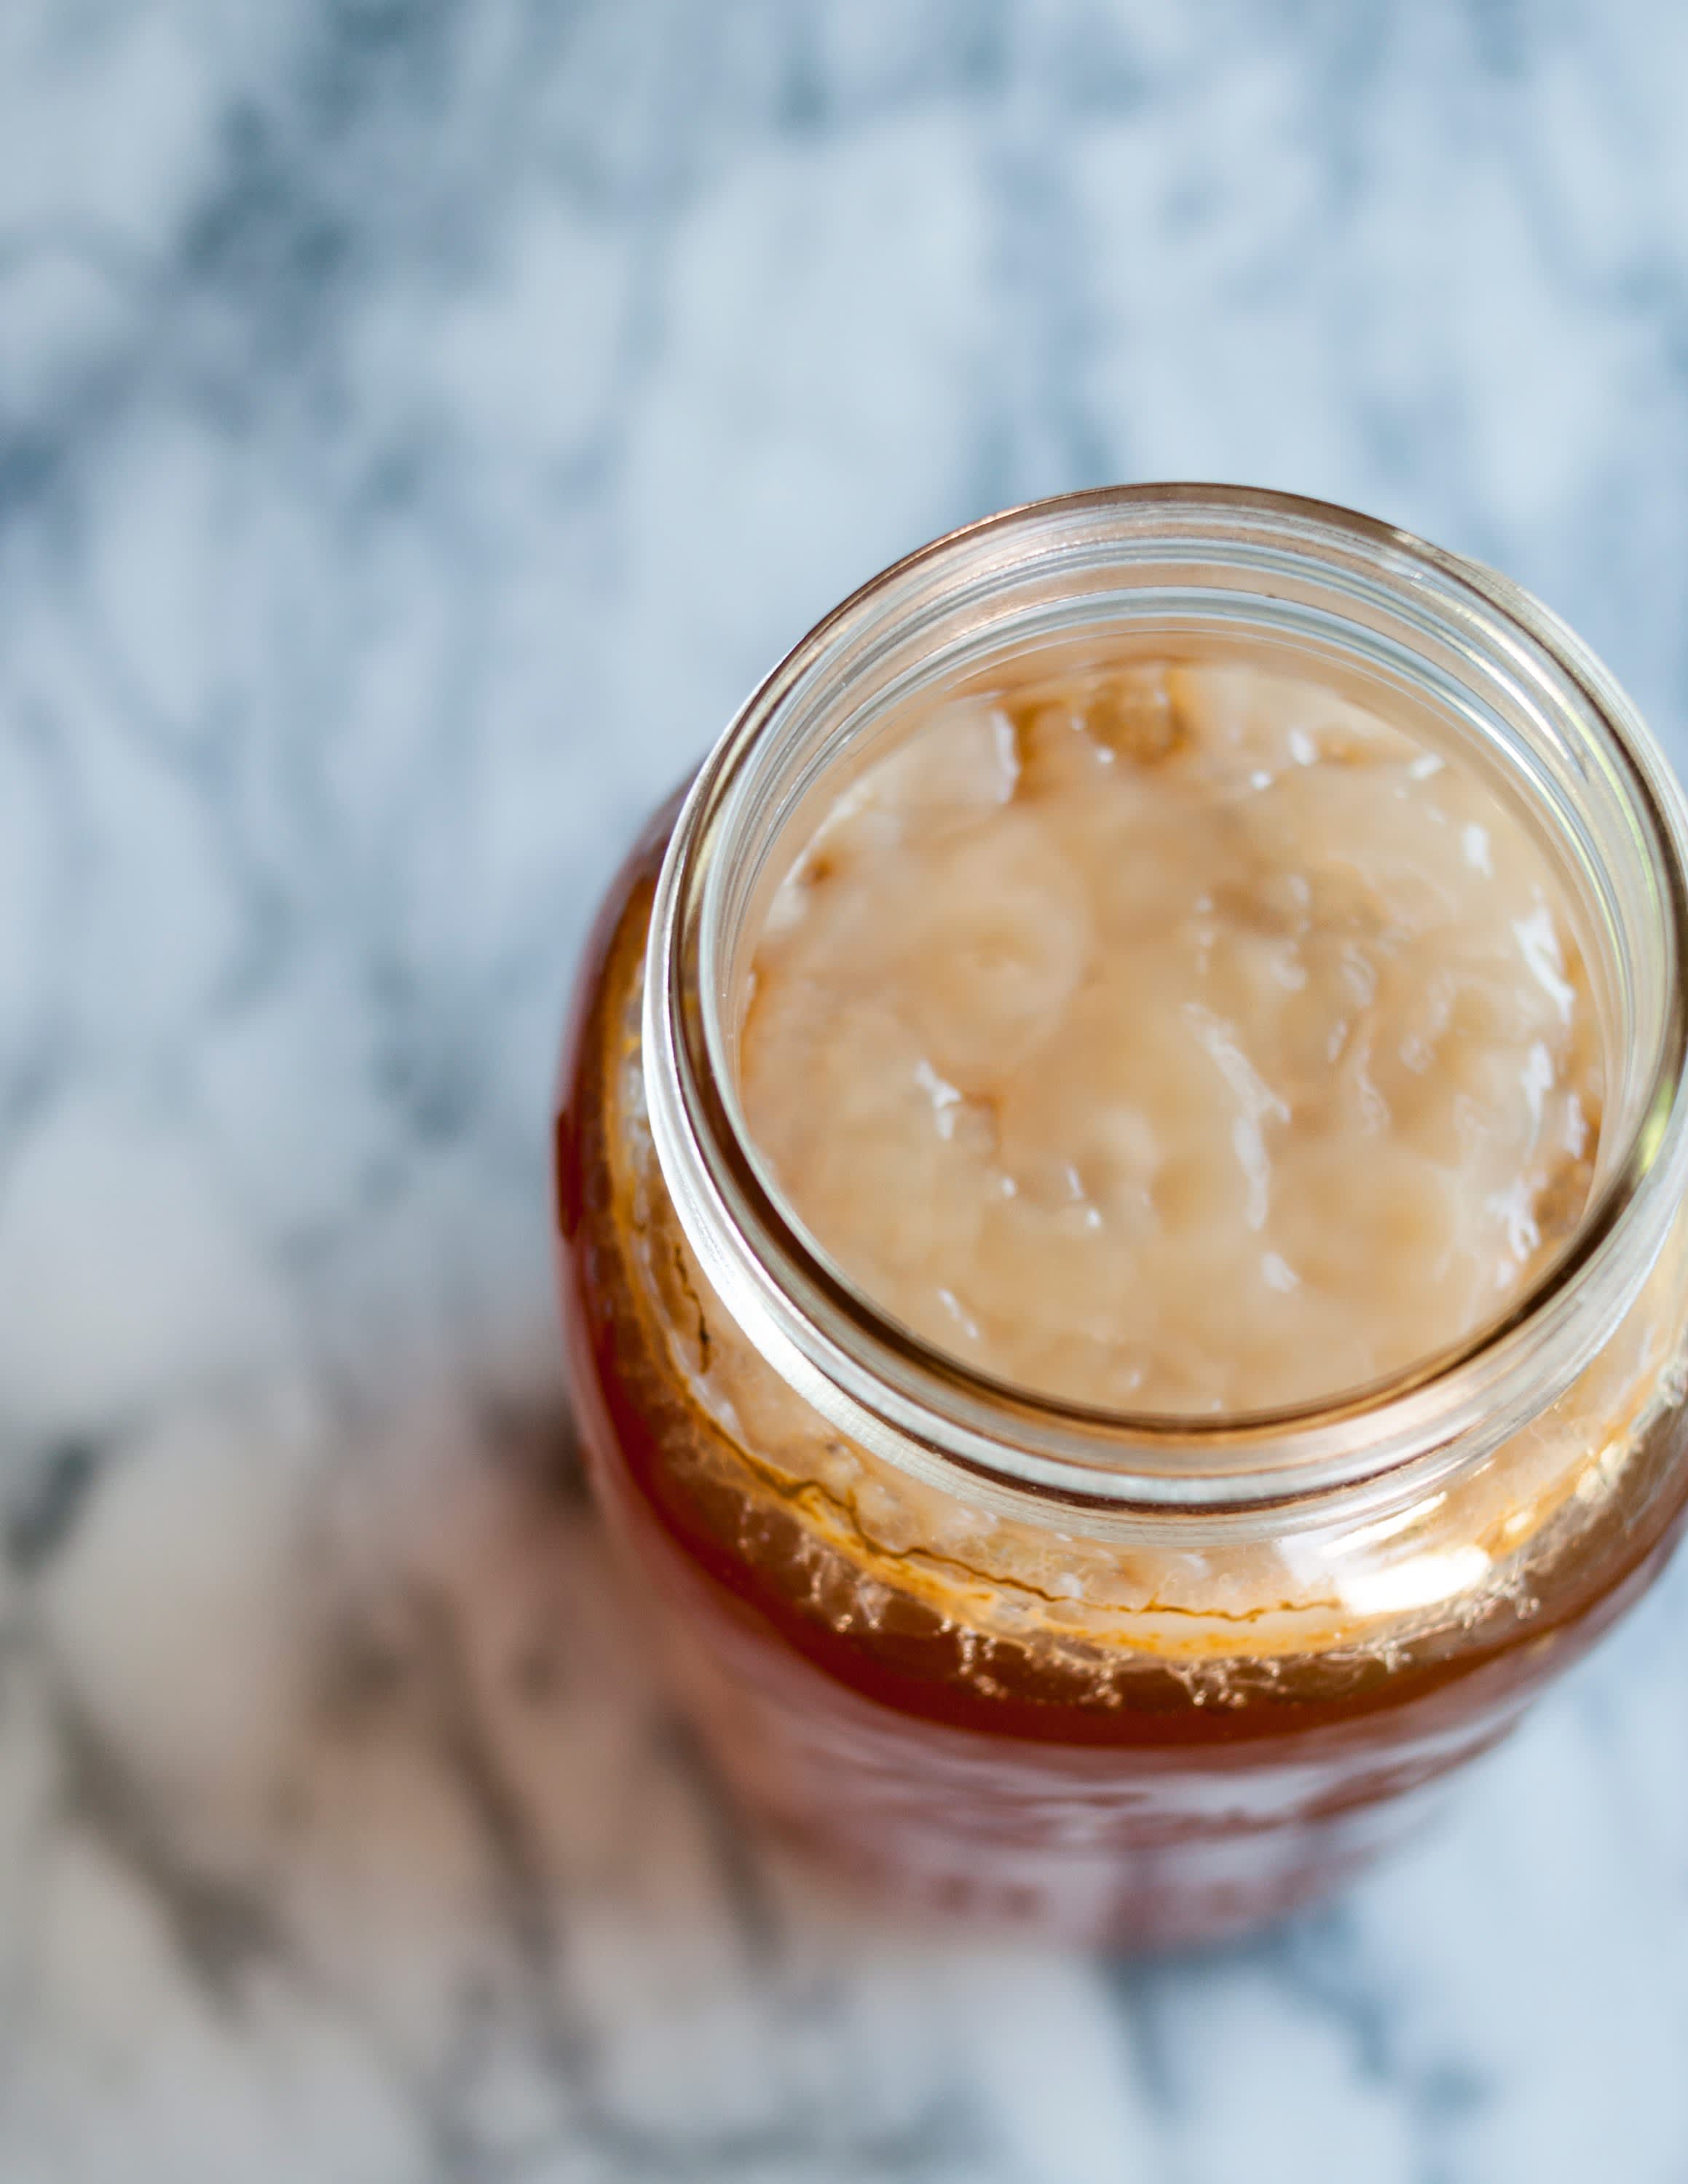 allplants  Kombucha Scoby: What Is It, and How Do You Make It?